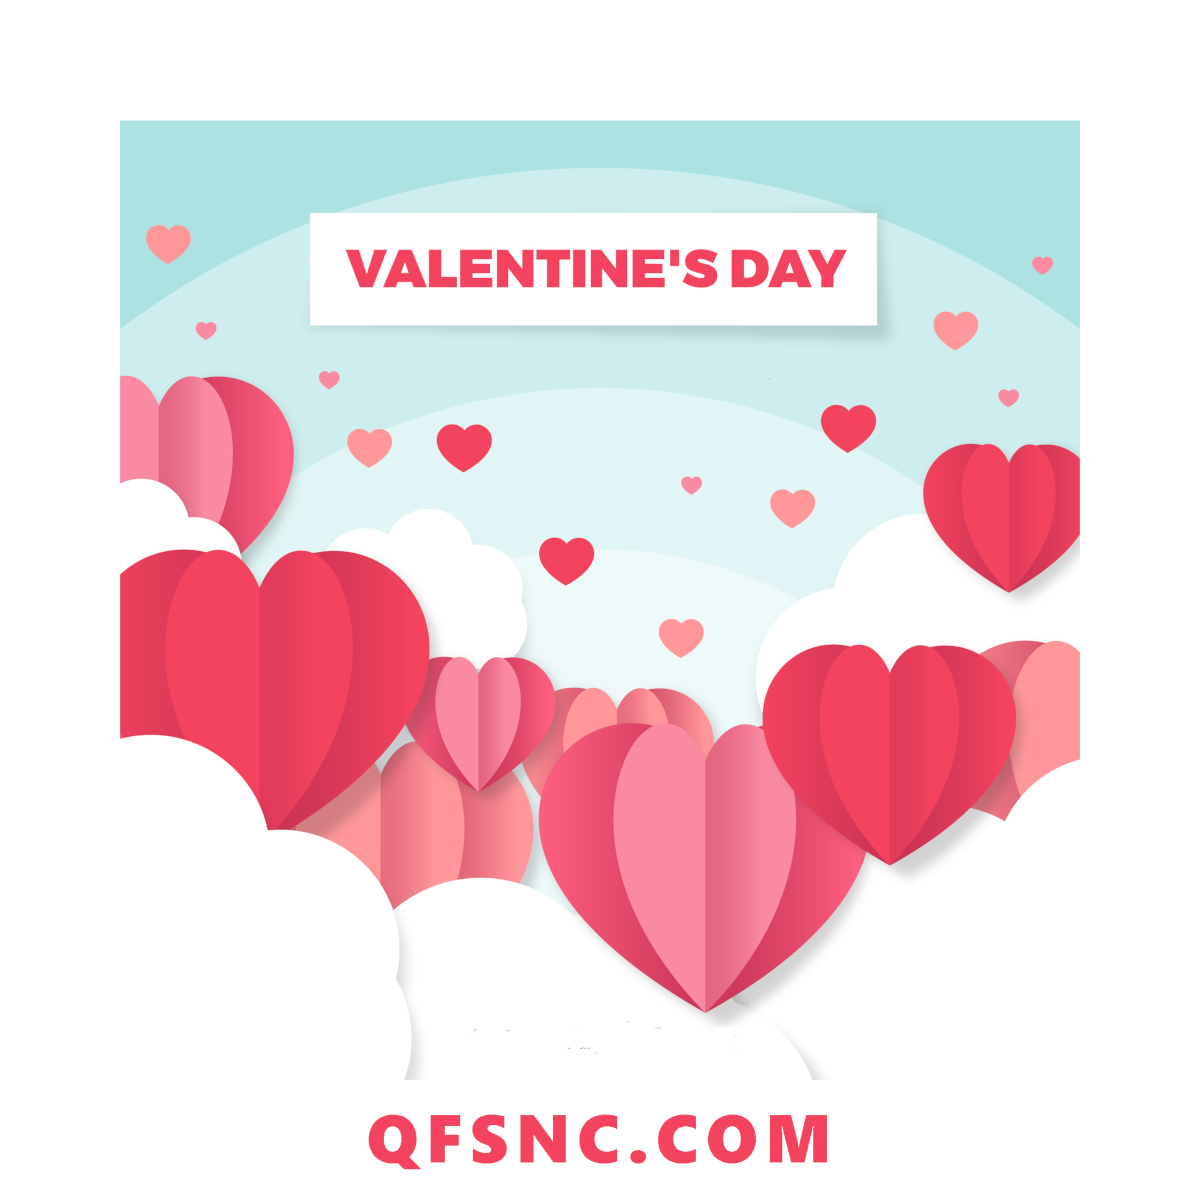 ❤️ Happy Valentine's Day ❤️ Celebrate the important people in your life. 😊😊😊😊😊😊😊😊😊😊 The Team At Quality Family Services #CharlotteNC #NorthCarolina